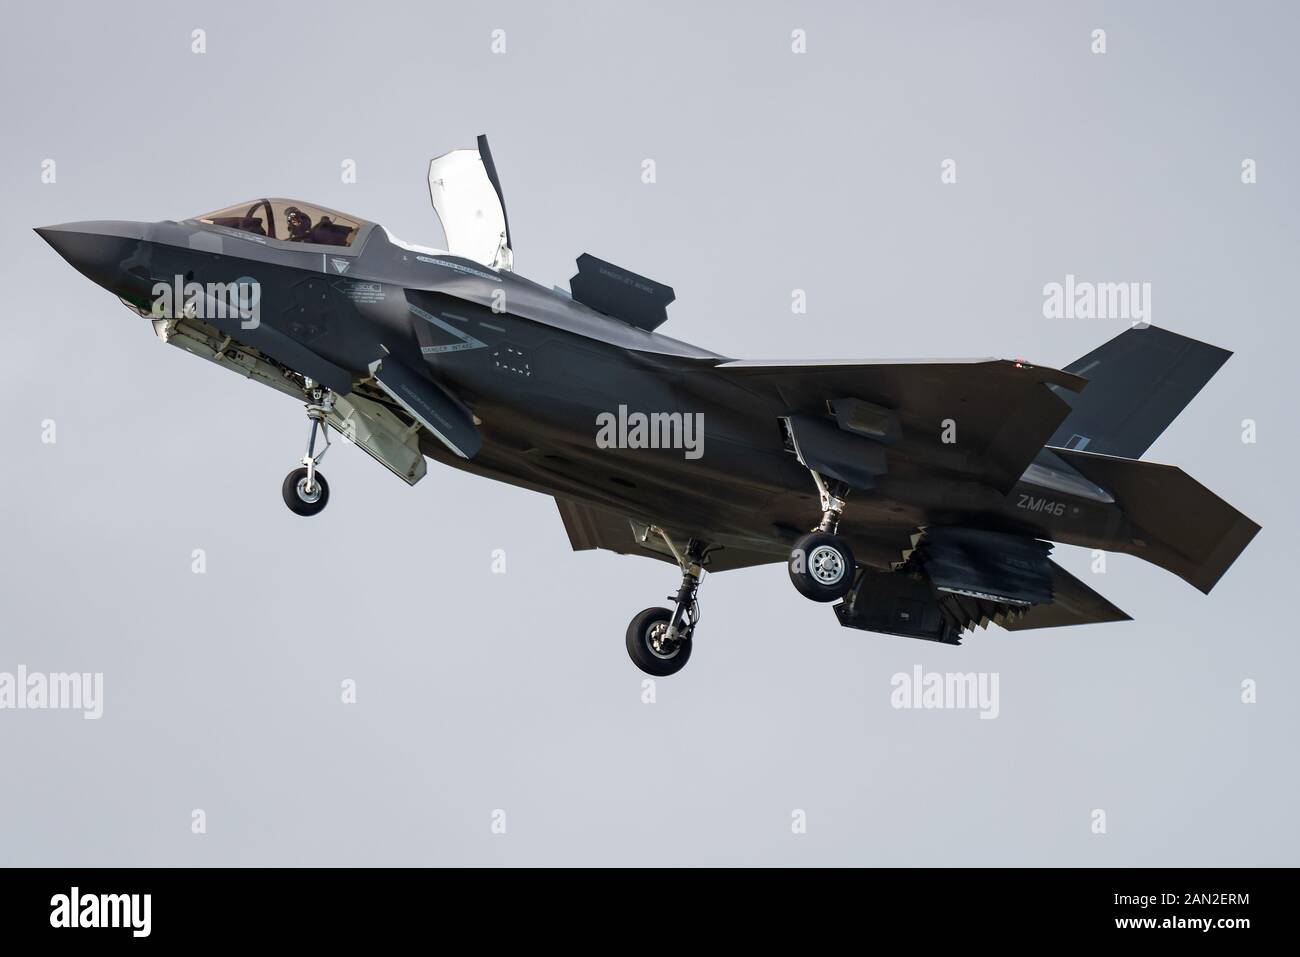 A Lockheed Martin F-35B Lightning II stealth fighter jet of the British Royal Air Force. Stock Photo